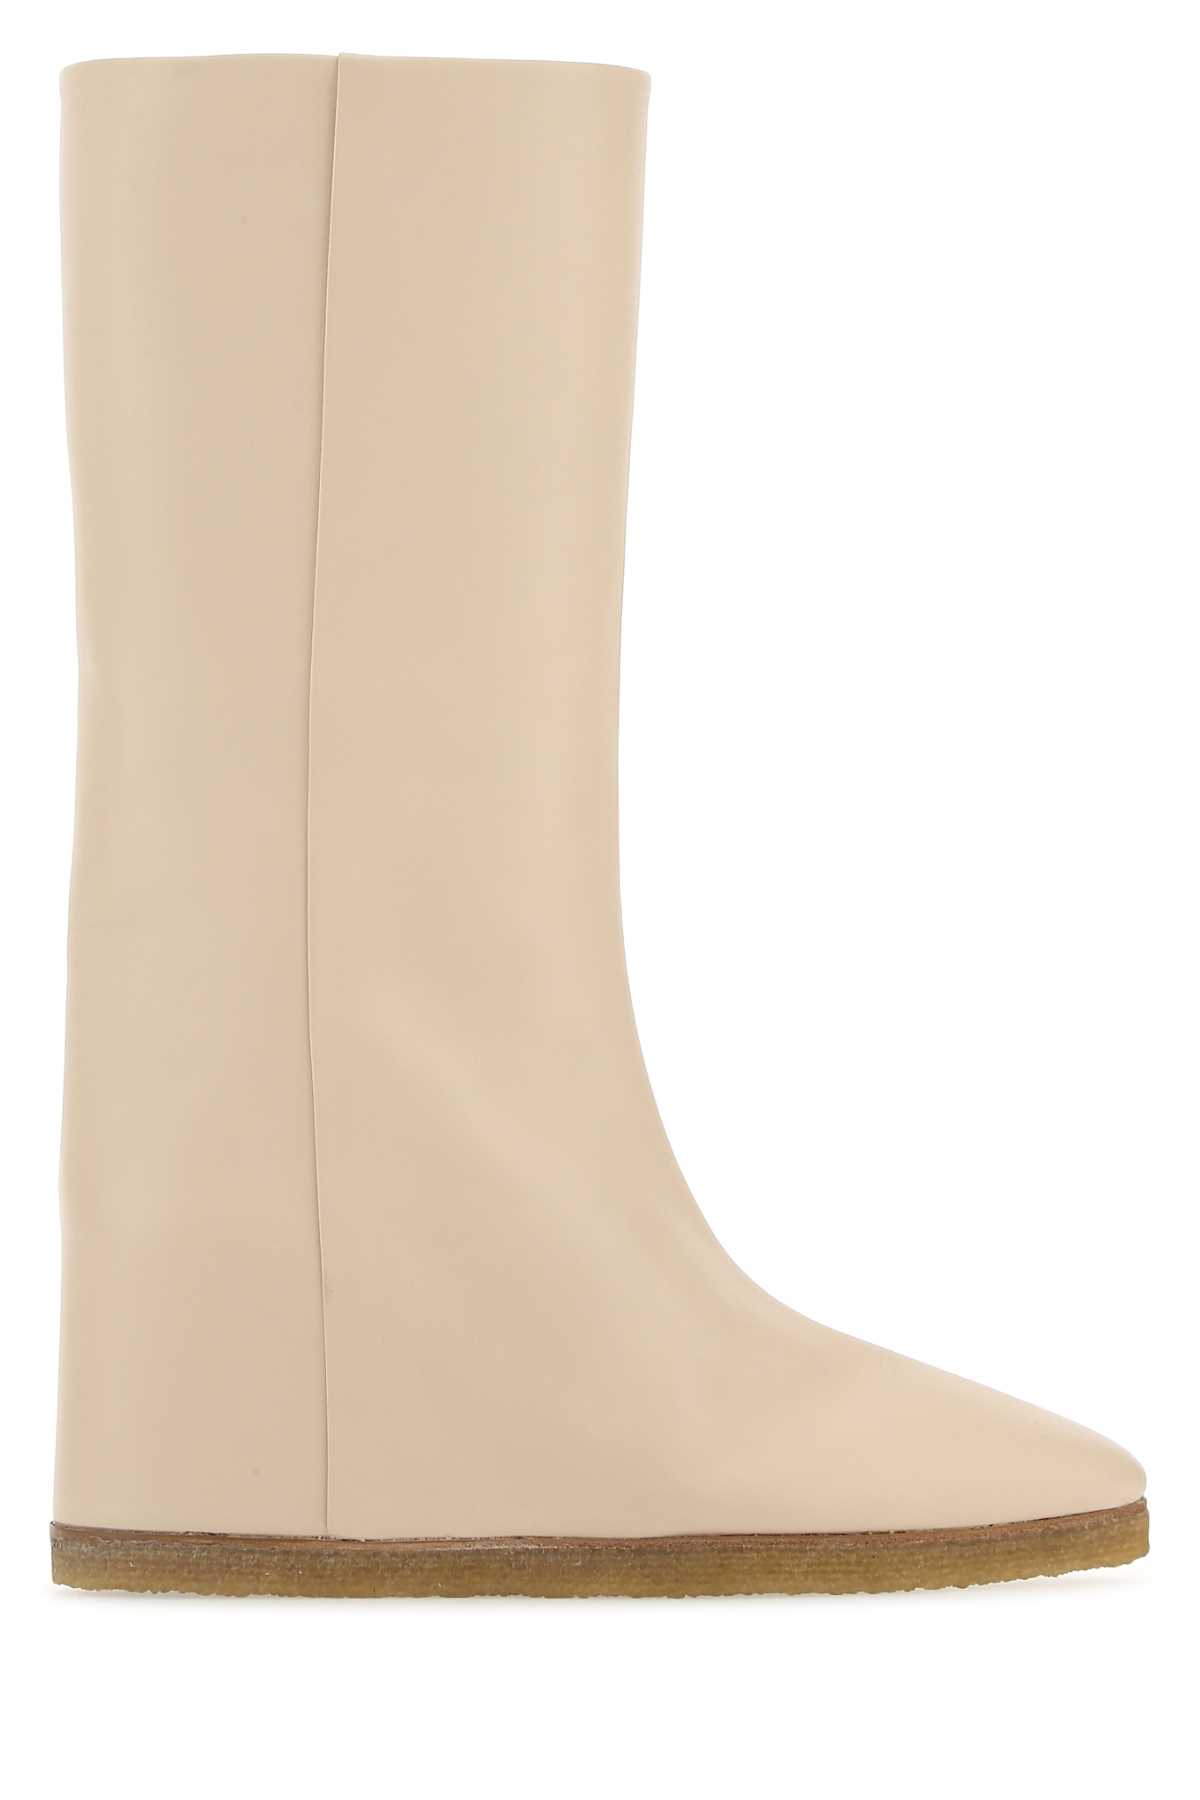 Chloé Sand Leather Moreen Boots